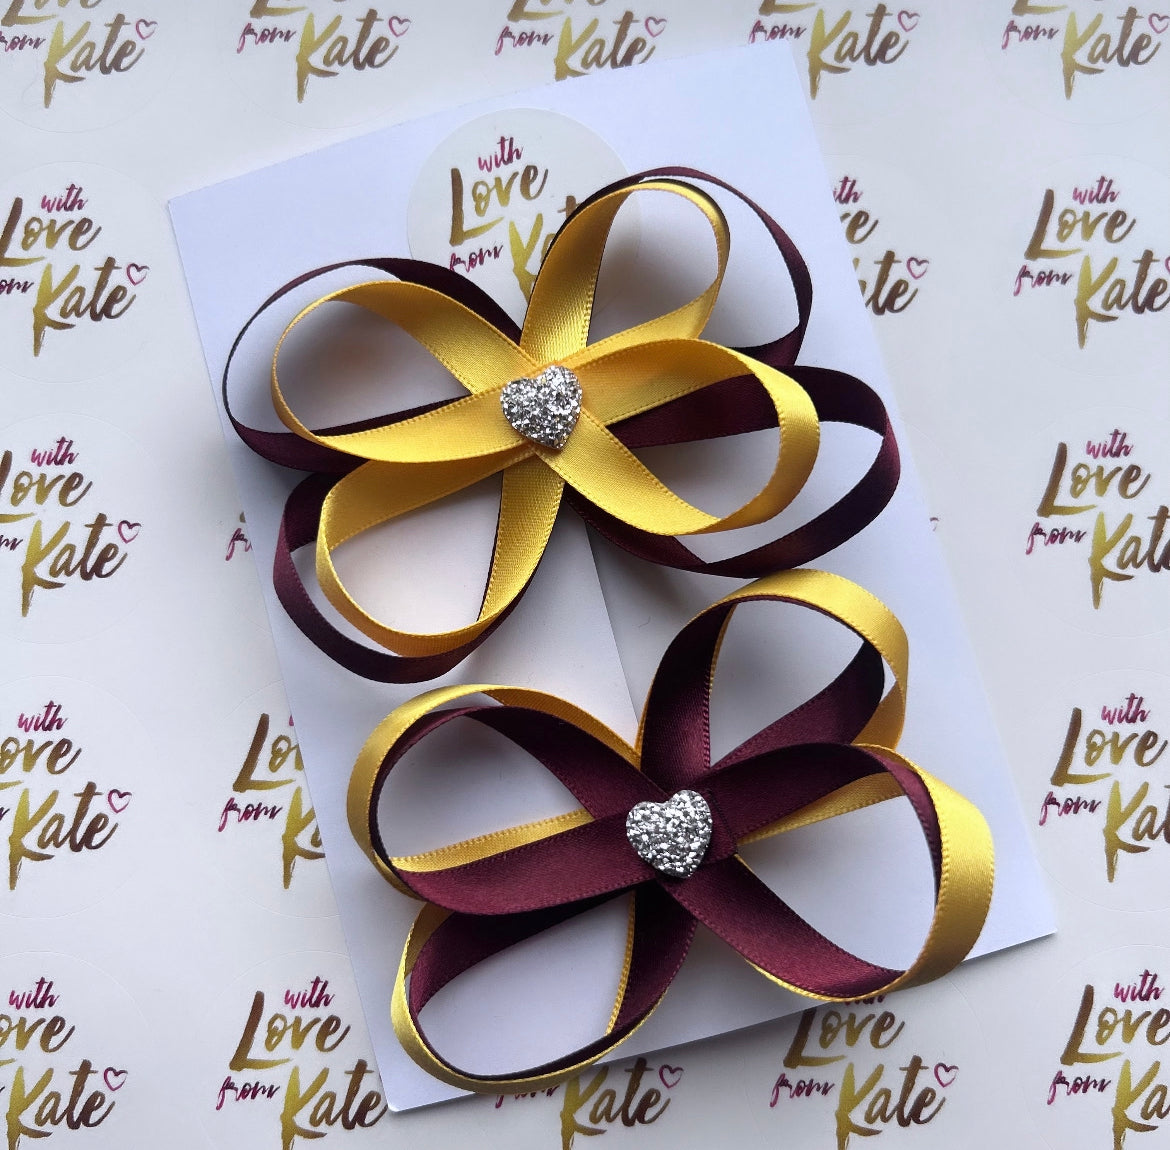 2 x maroon & yellow satin butterfly bows with heart centres